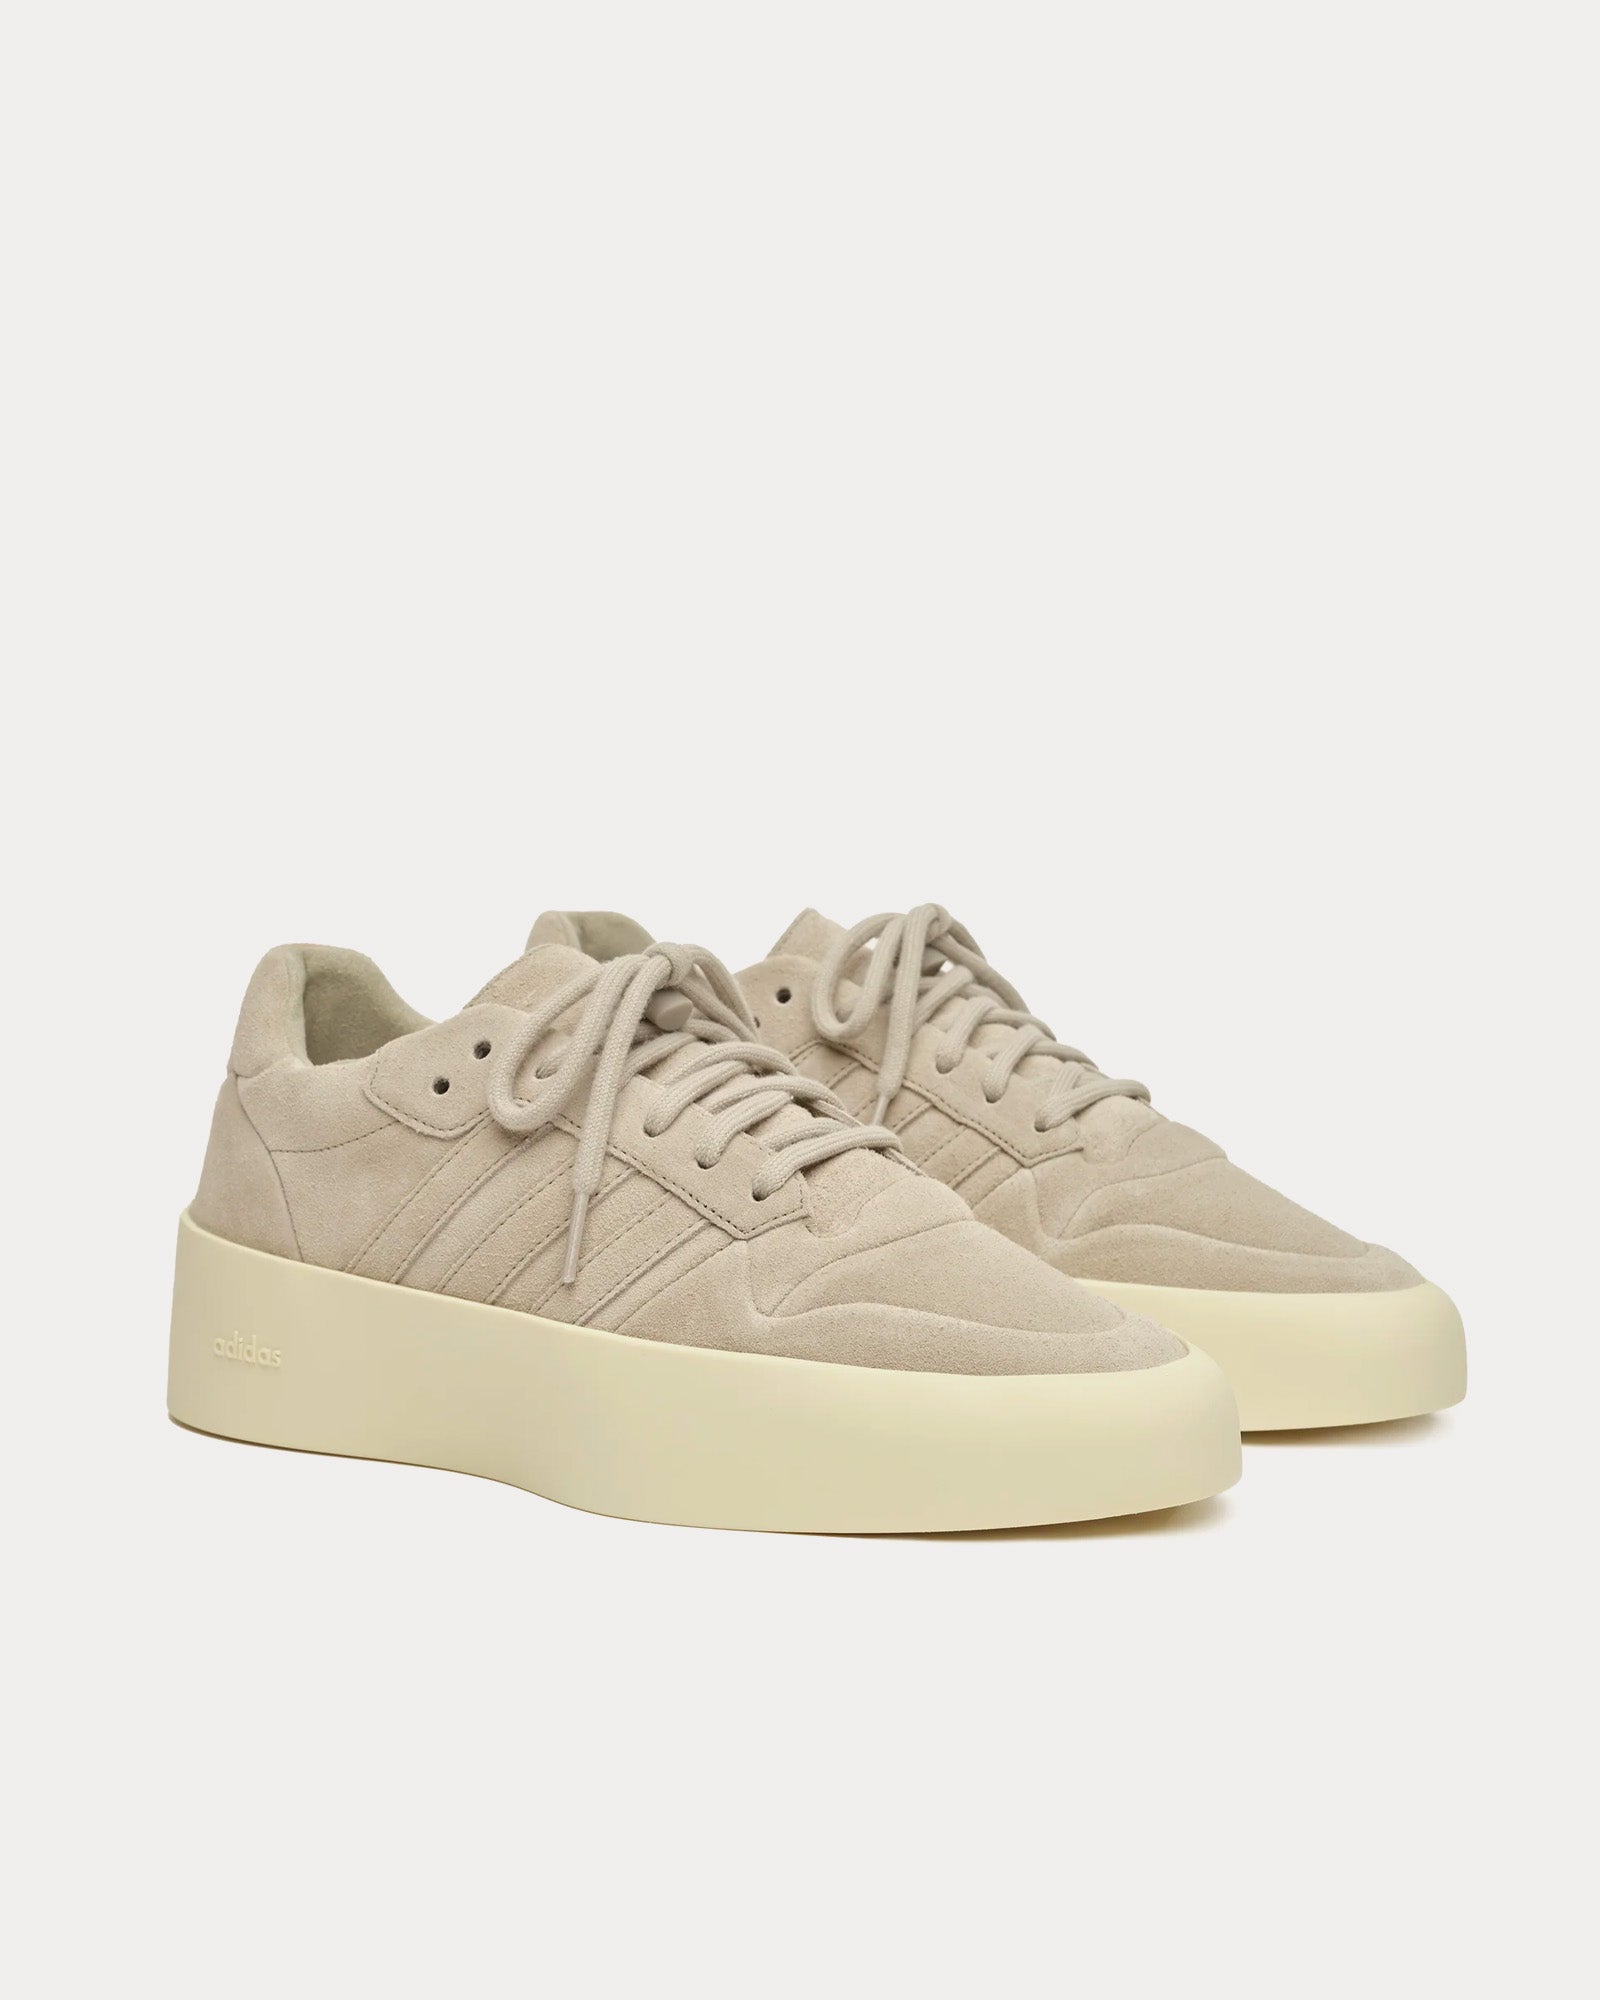 Fear of God Athletics - '86 Lo Sesame Low Top Sneakers